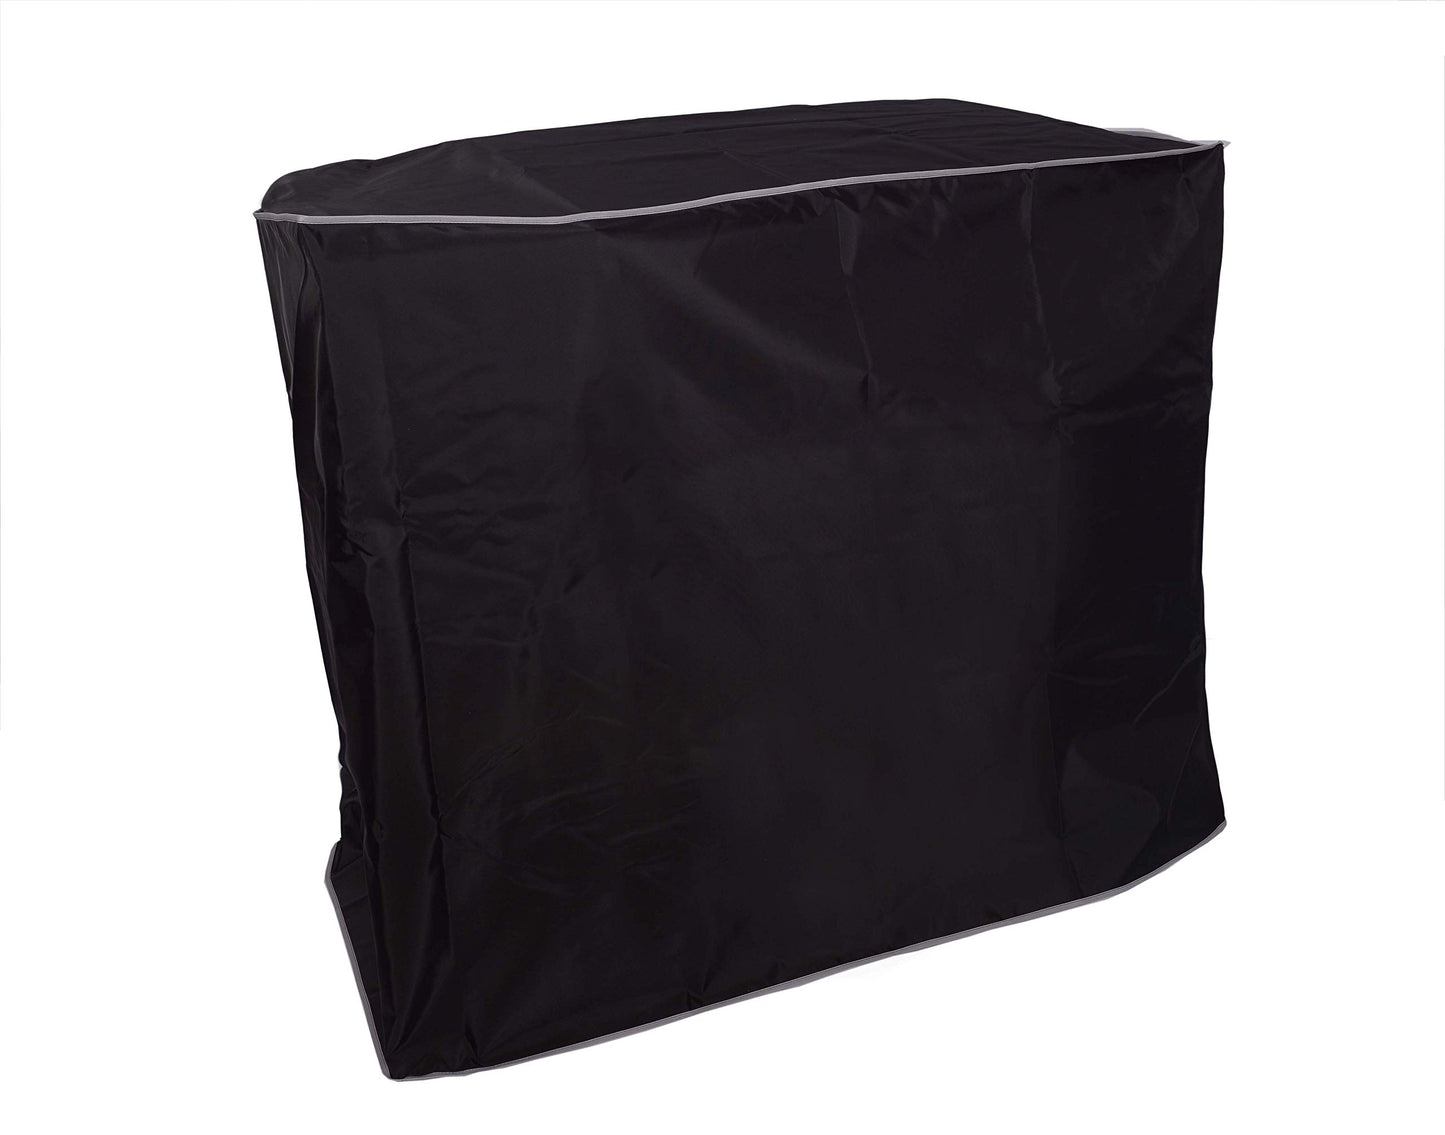 The Perfect Dust Cover, Black Nylon Cover for HP DesignJet T1600dr 36-in PostScrip Printer, Anti Static and Waterproof Cover, Dimensions 53''W x 30''D x 43''H by The Perfect Dust Cover LLC